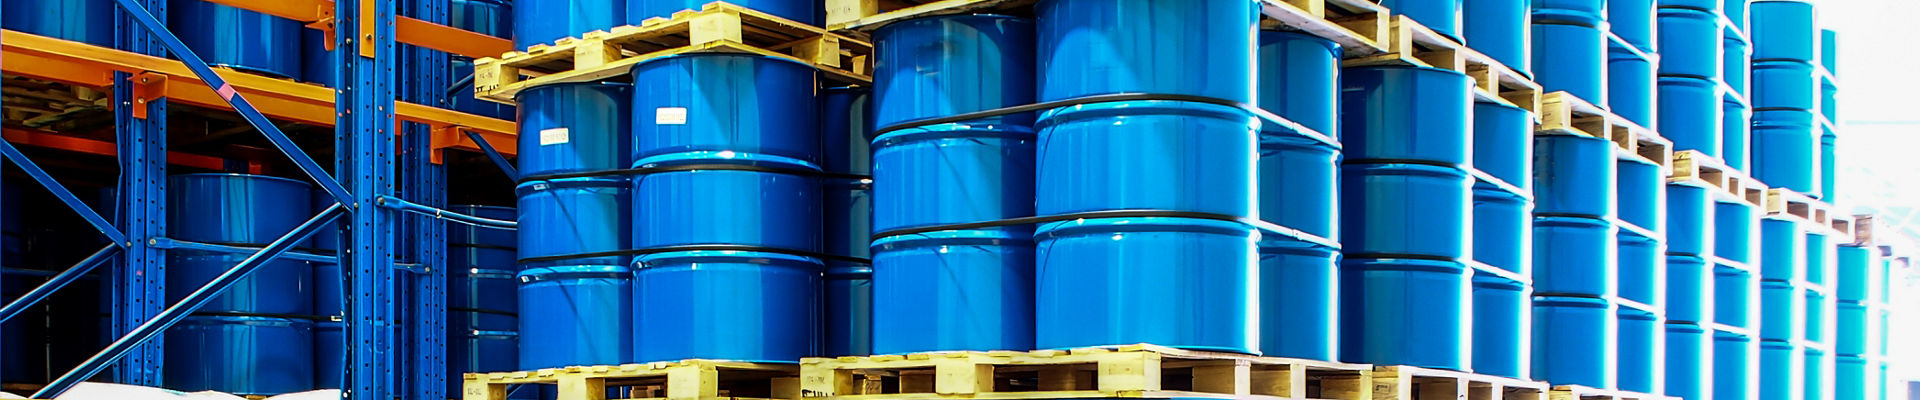 Blue industrial drums on warehouse shelves